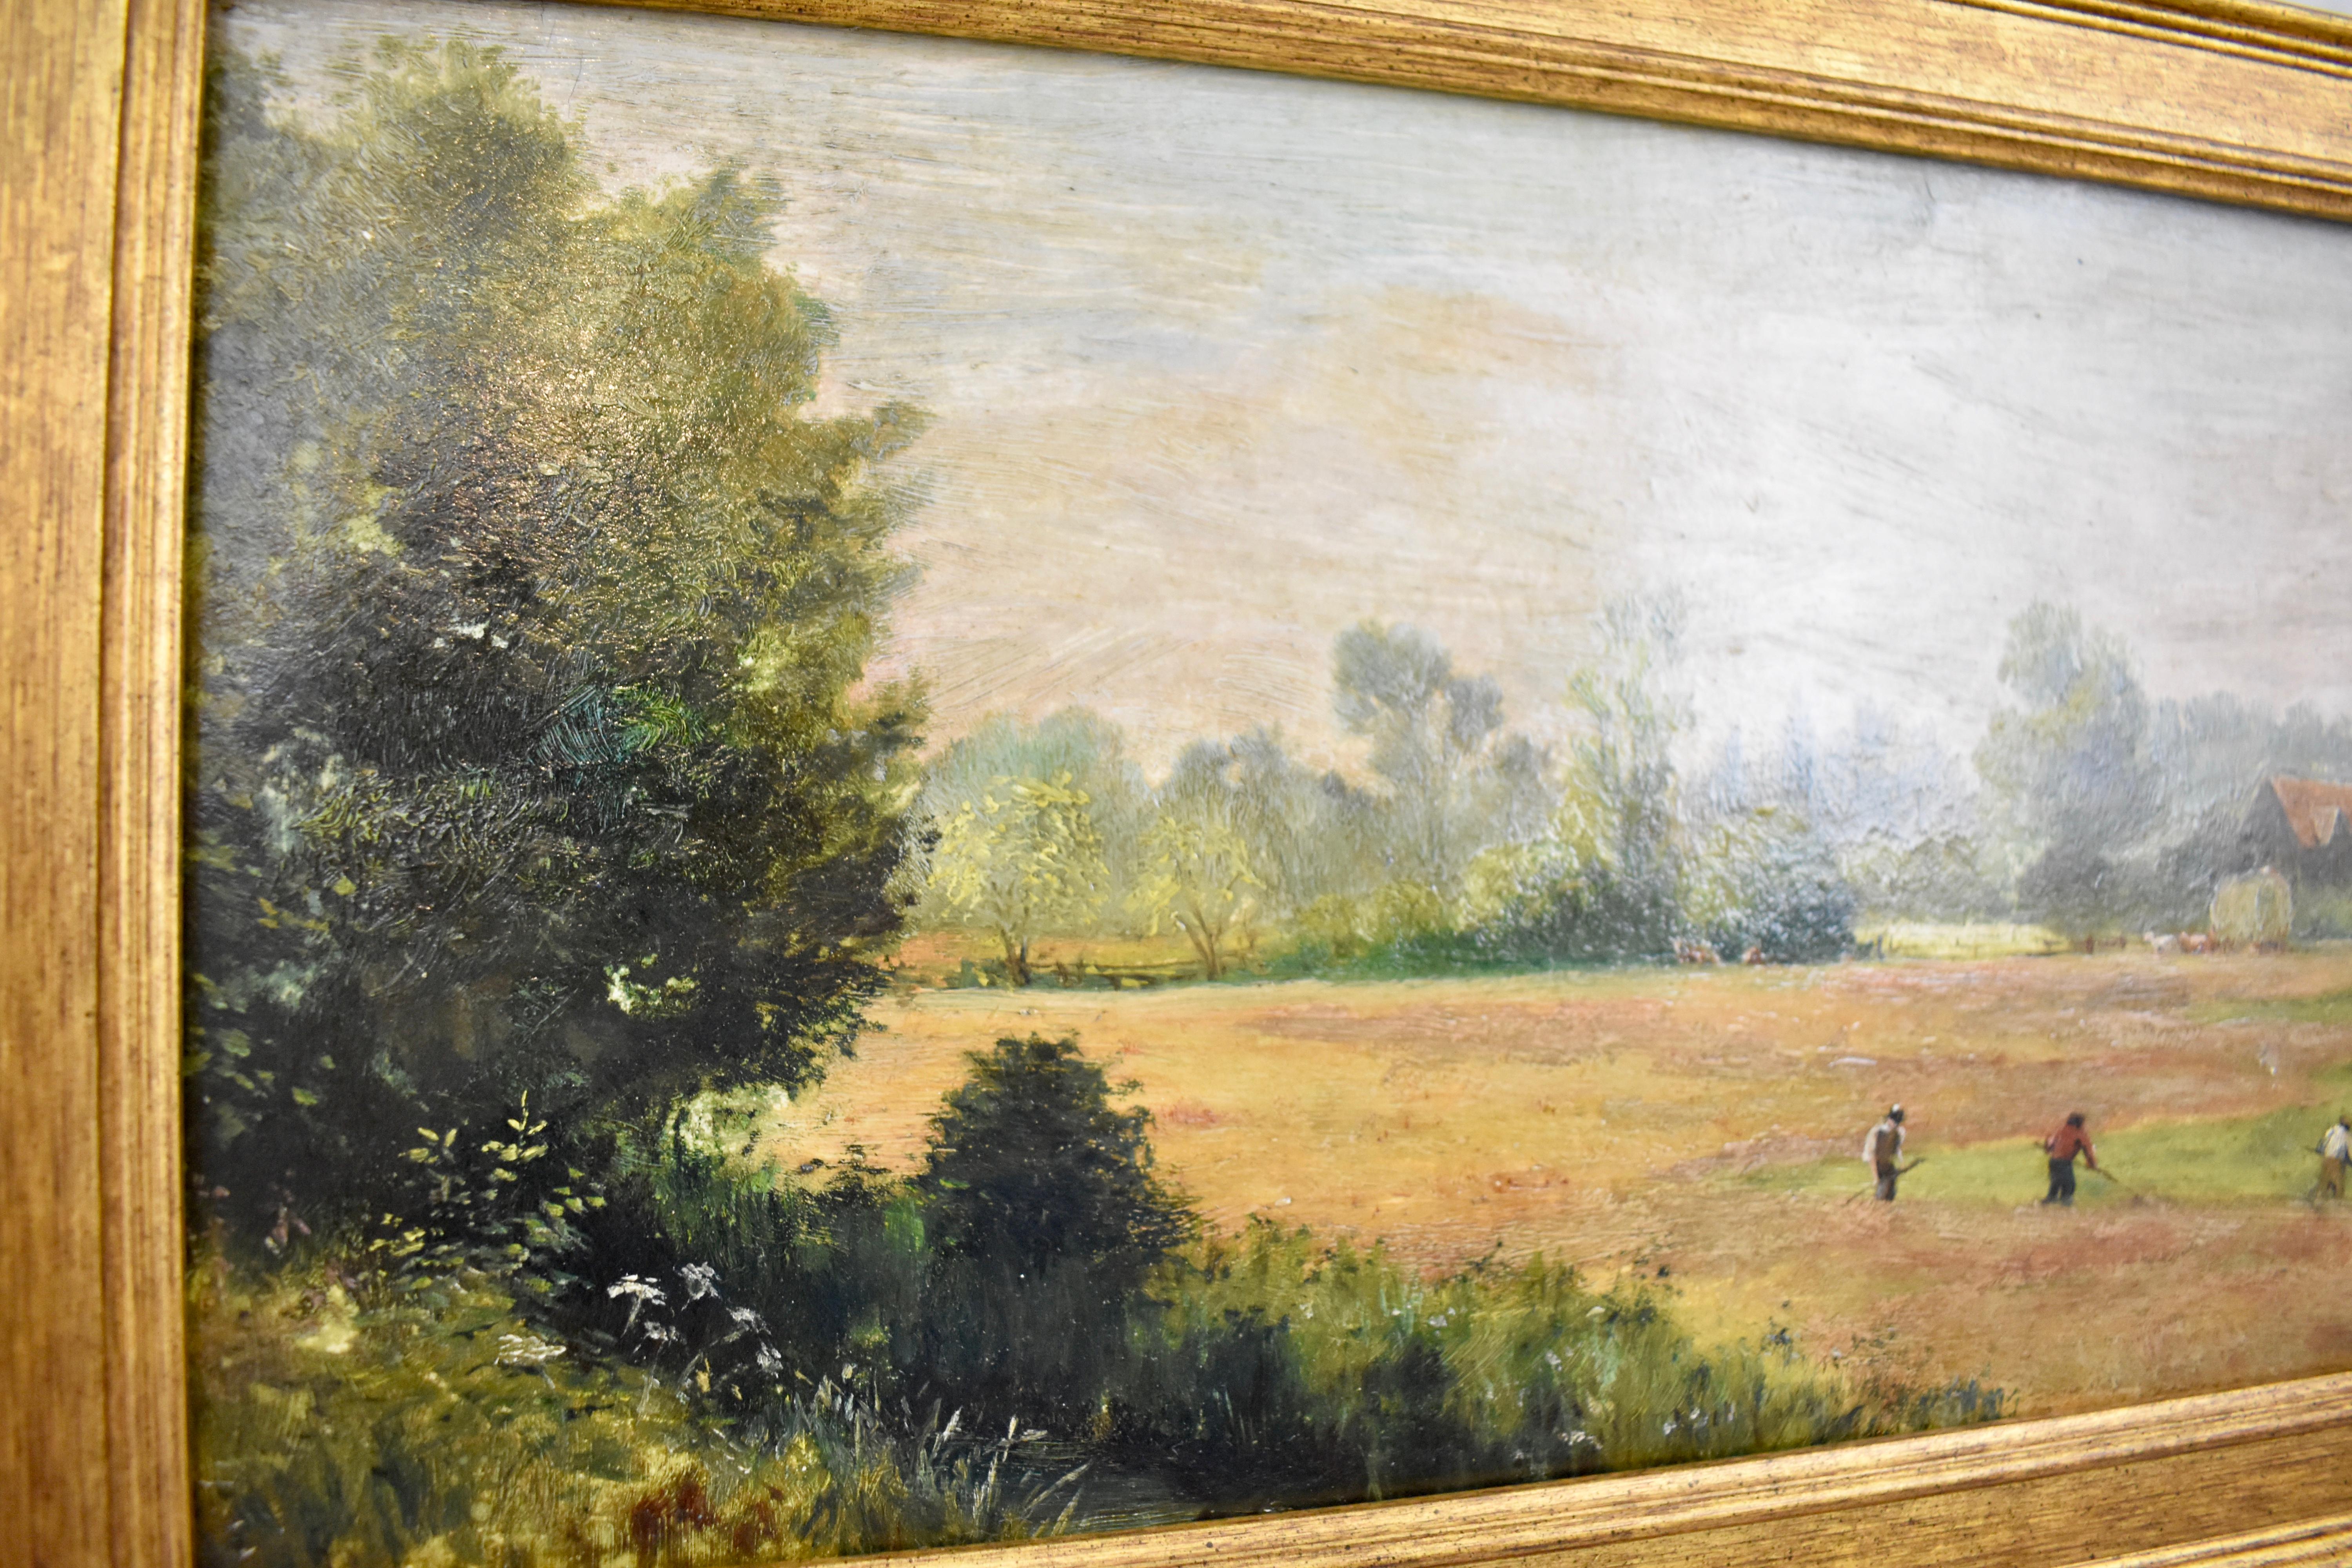 English Afternoon Pastoral Farm Scene Oil on Linen Painting Gold Leaf Wood Frame For Sale 4